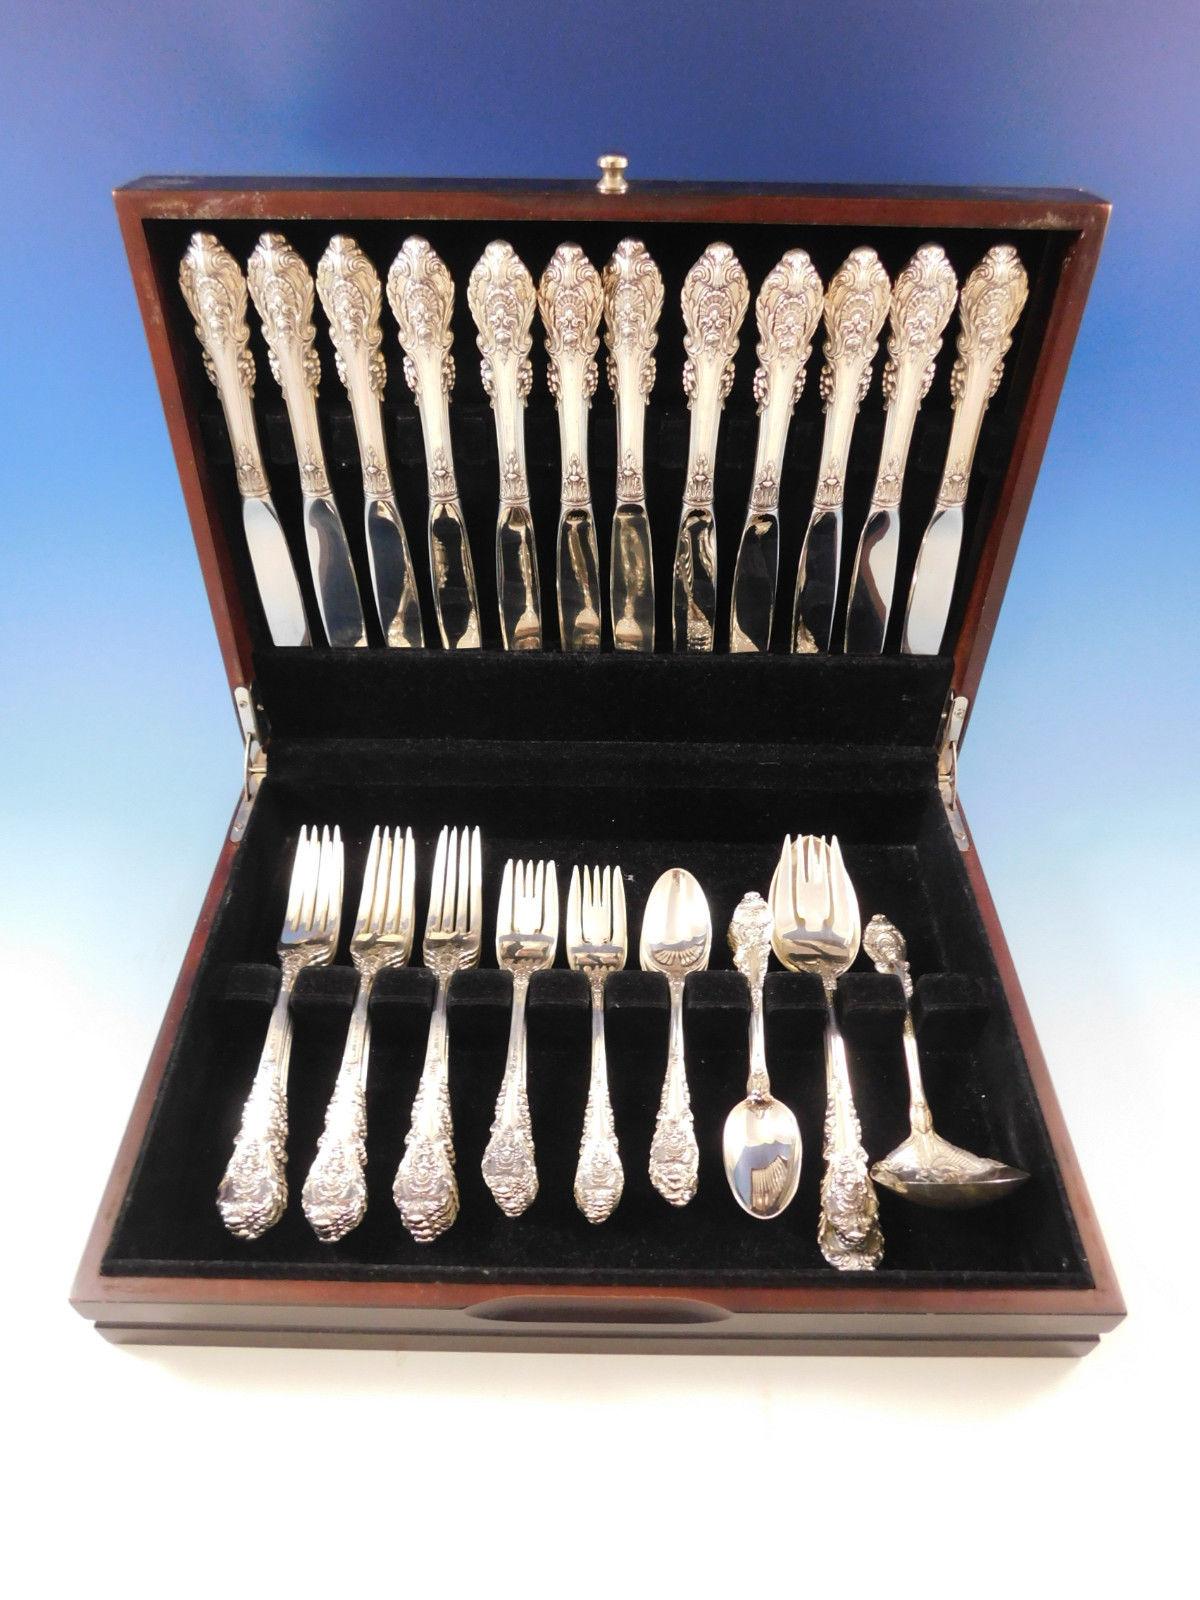 Dinner size Sir Christopher by Wallace Sterling silver flatware set, 51 pieces. This set includes:

12 dinner size knives, 9 3/4